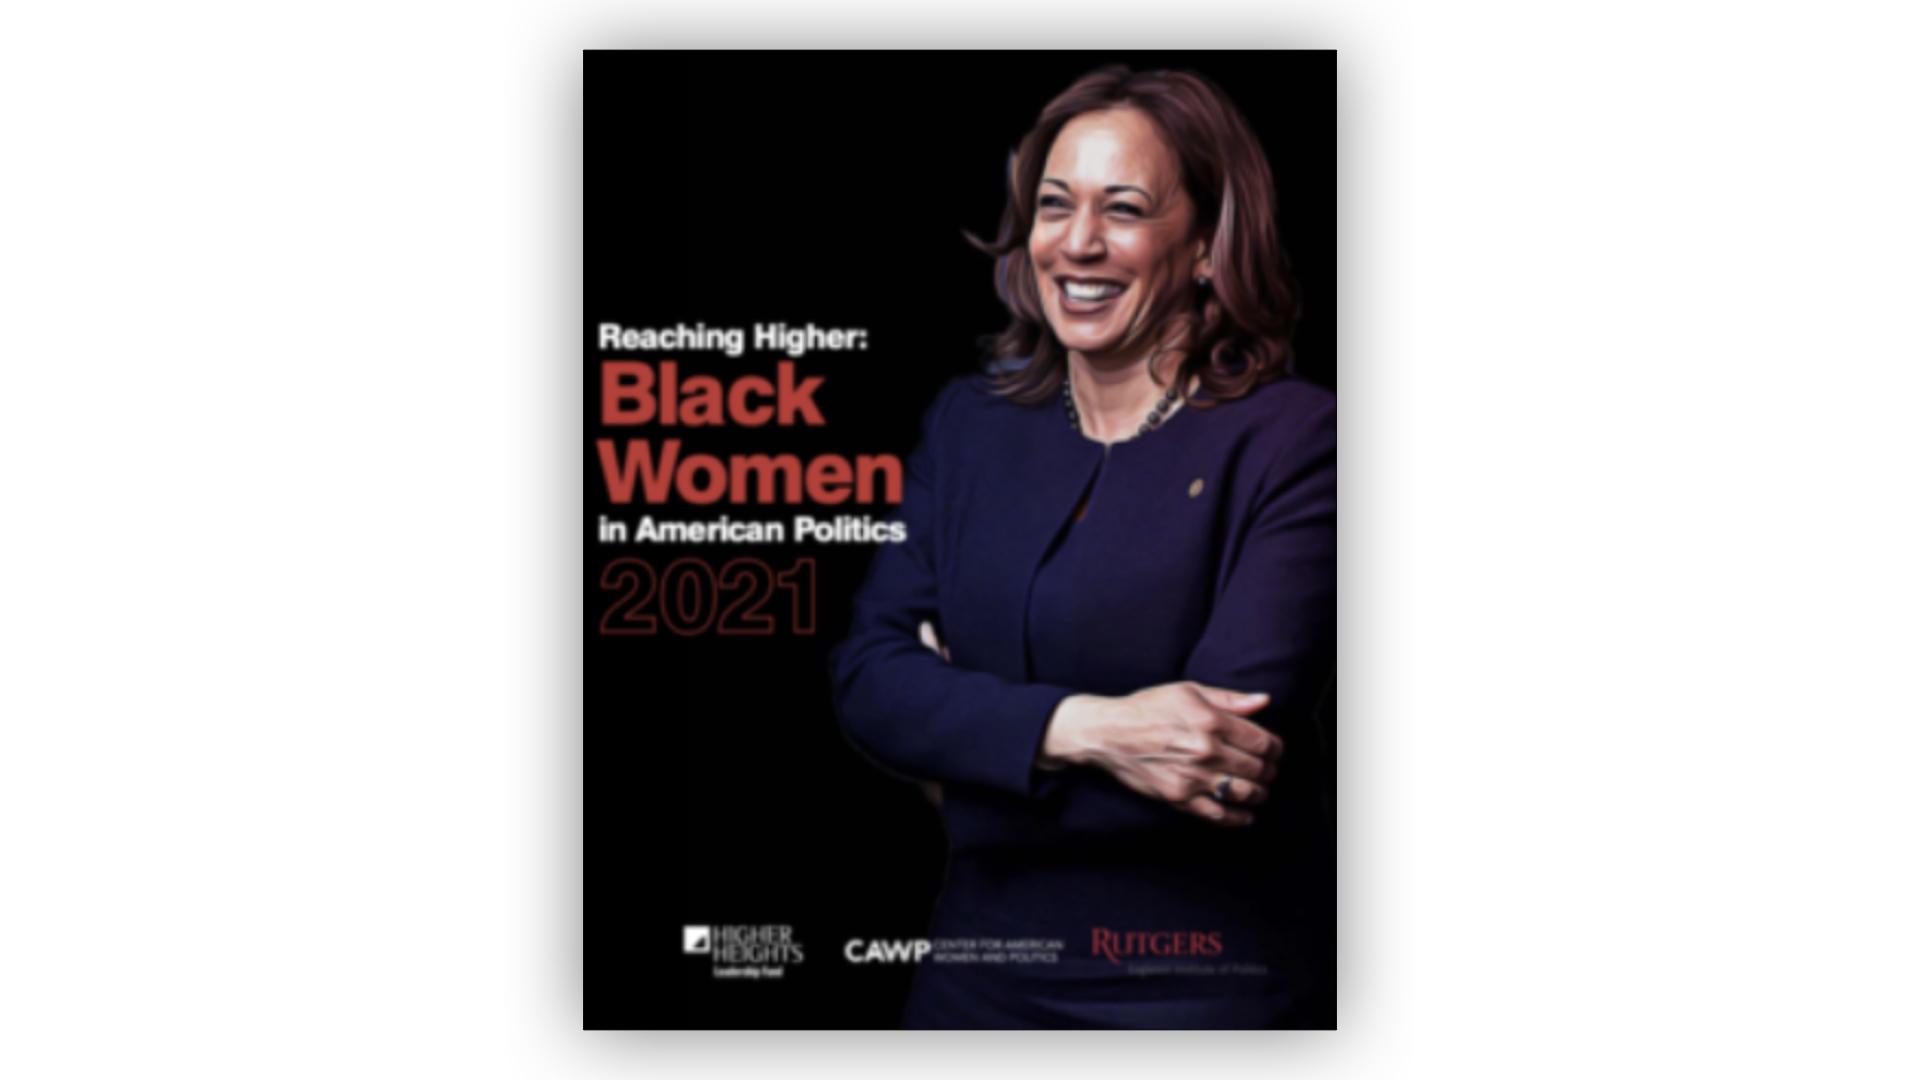 Reach higher: black women in American politics 2021 - cover higher heights leadership fund